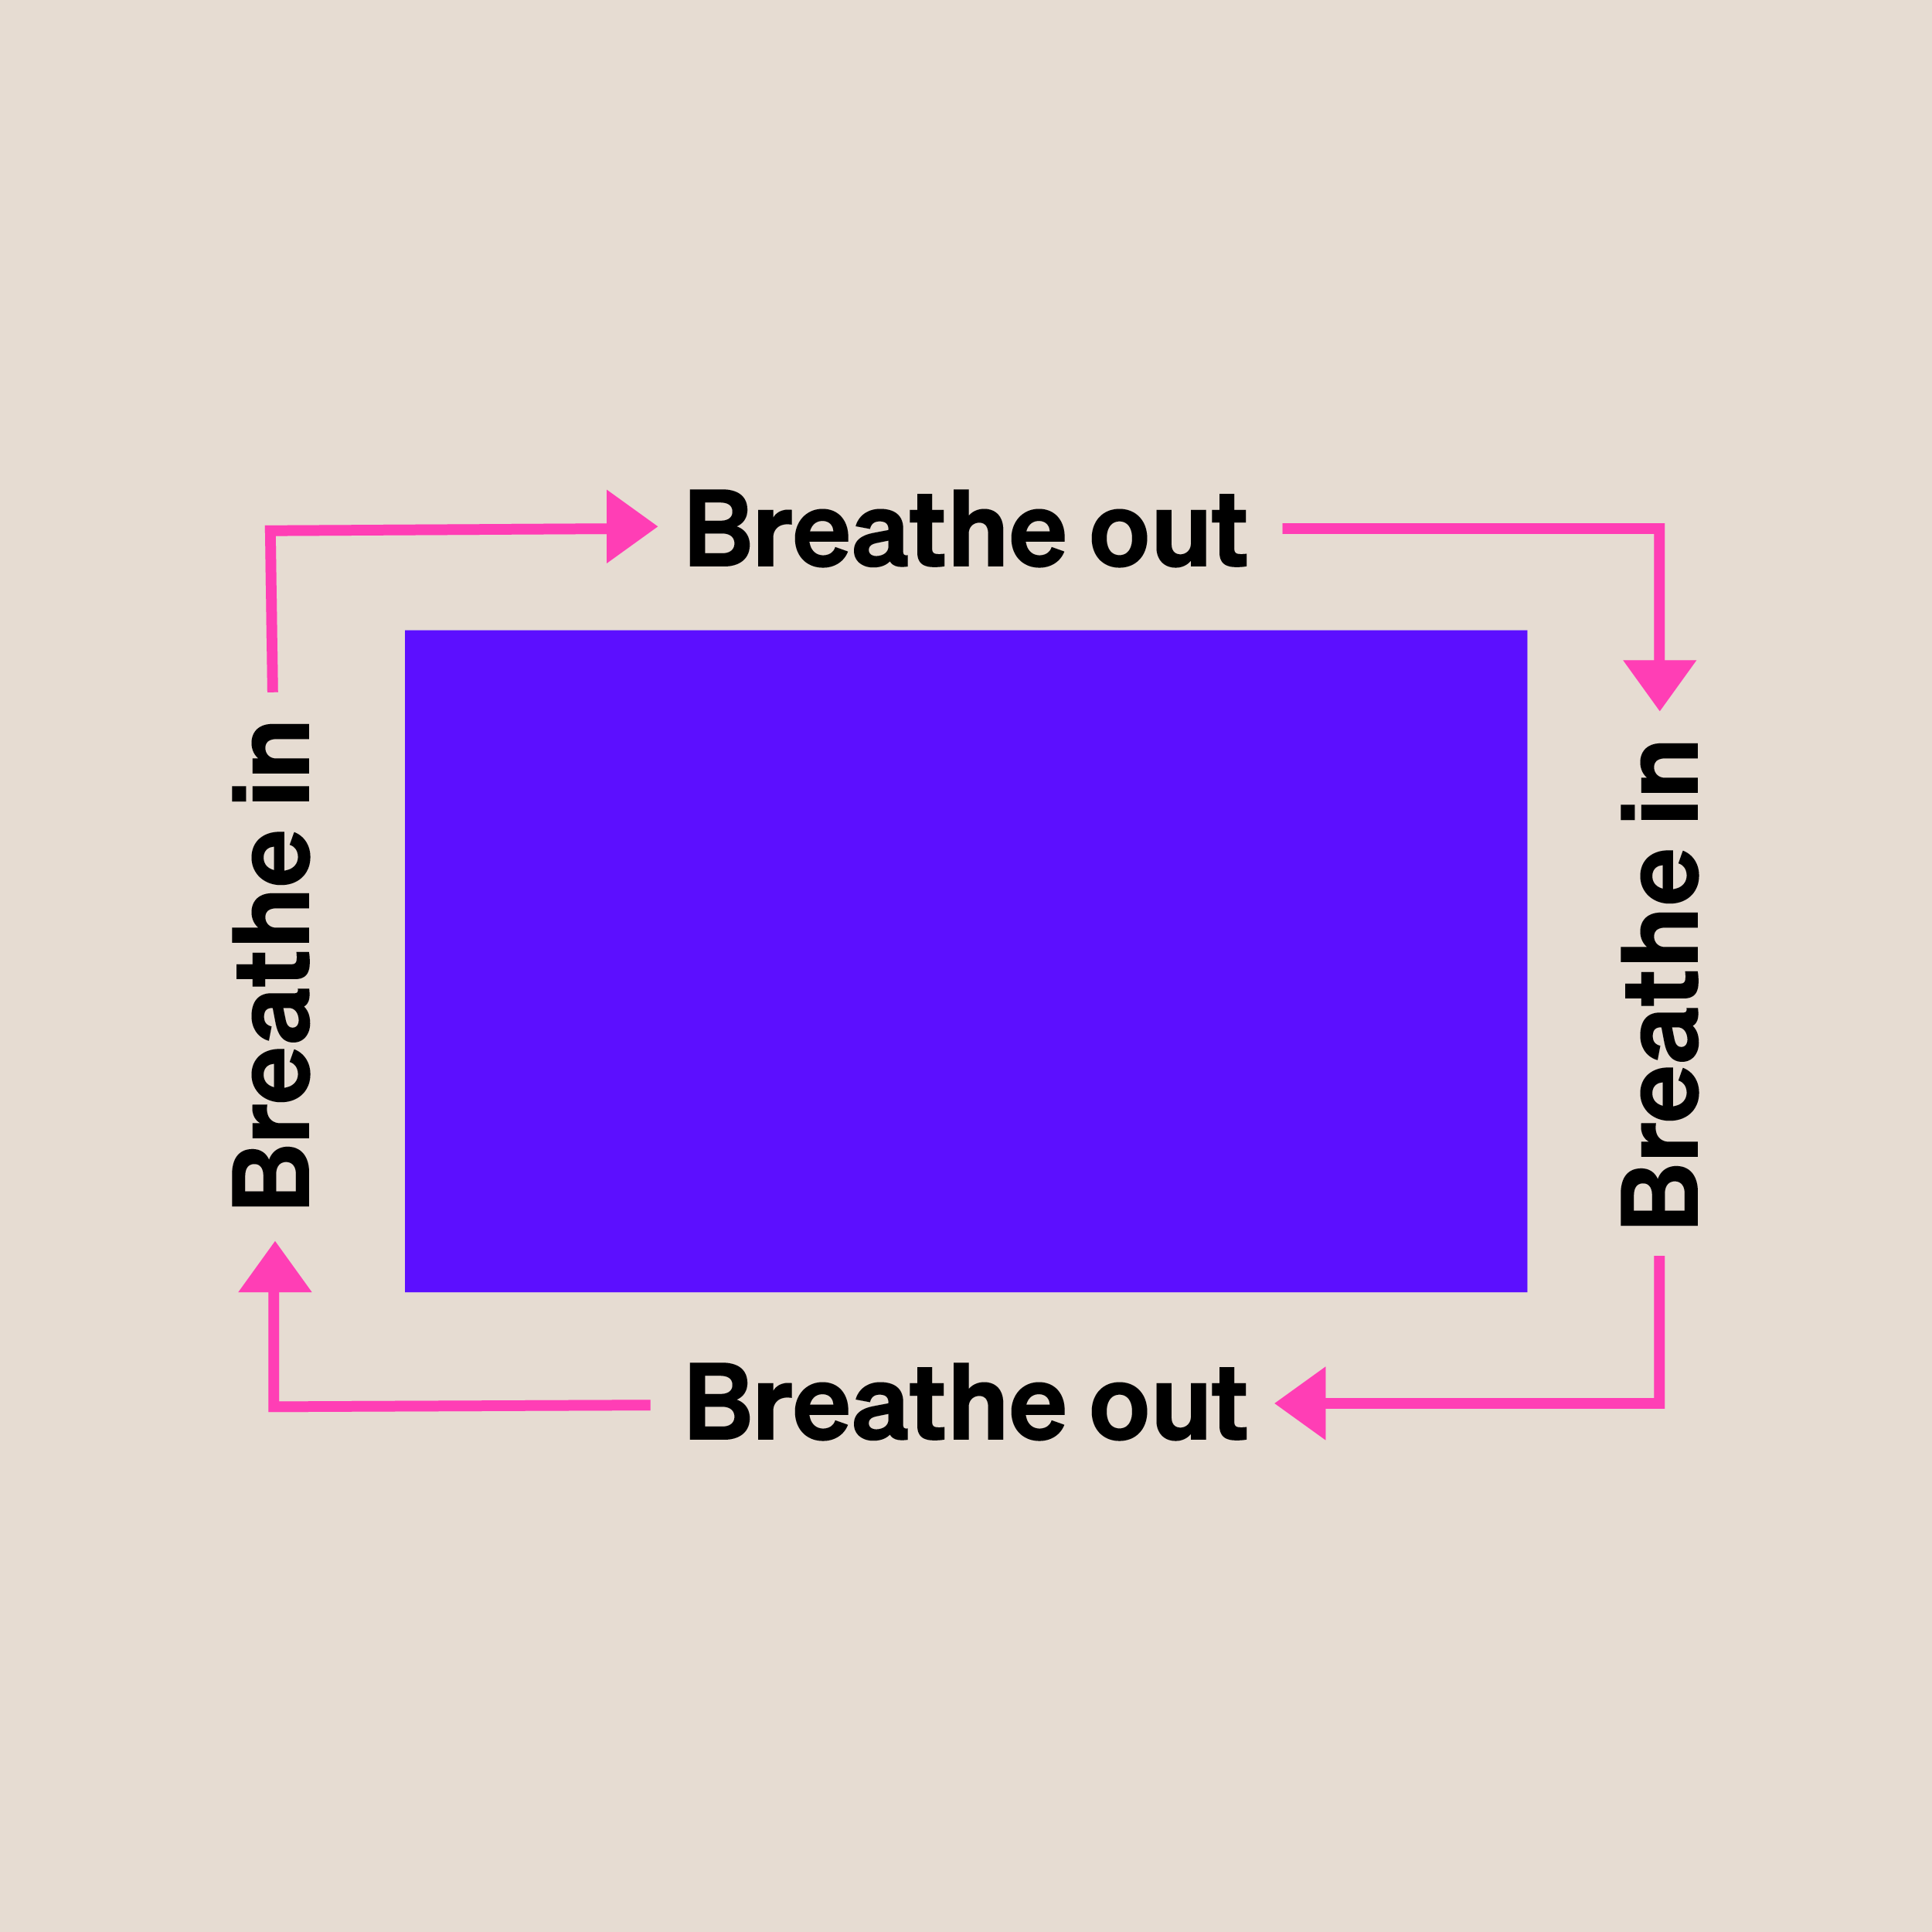 COPD Breathing Exercise: Pursed Lip Breathing - YouTube